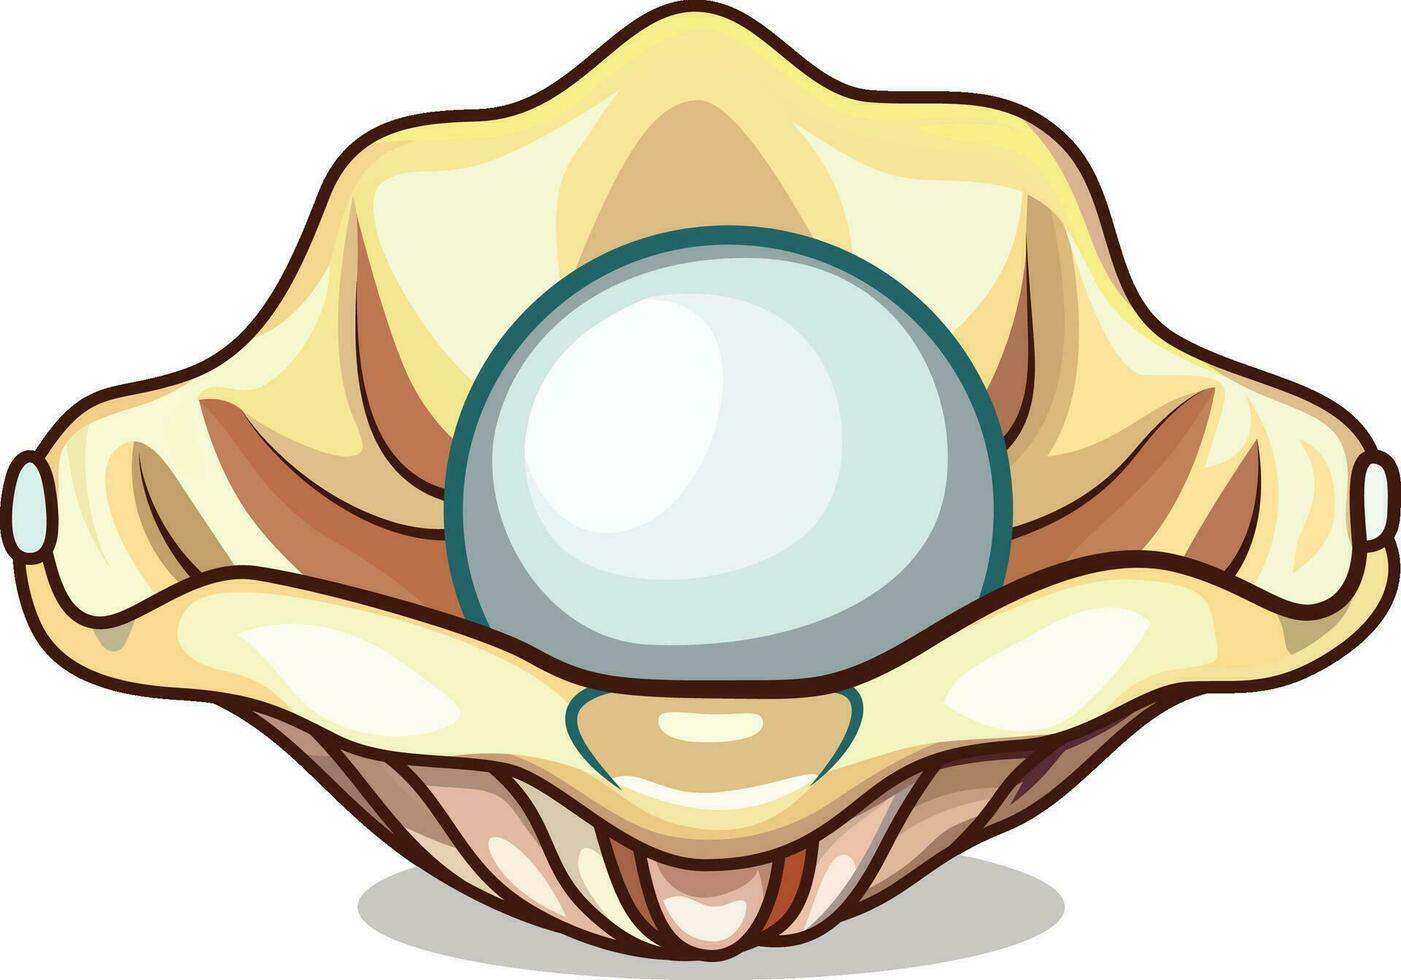 pearl inside oyster shell cartoon style vector illustration, Big pearl and Oyster shell stock vector image